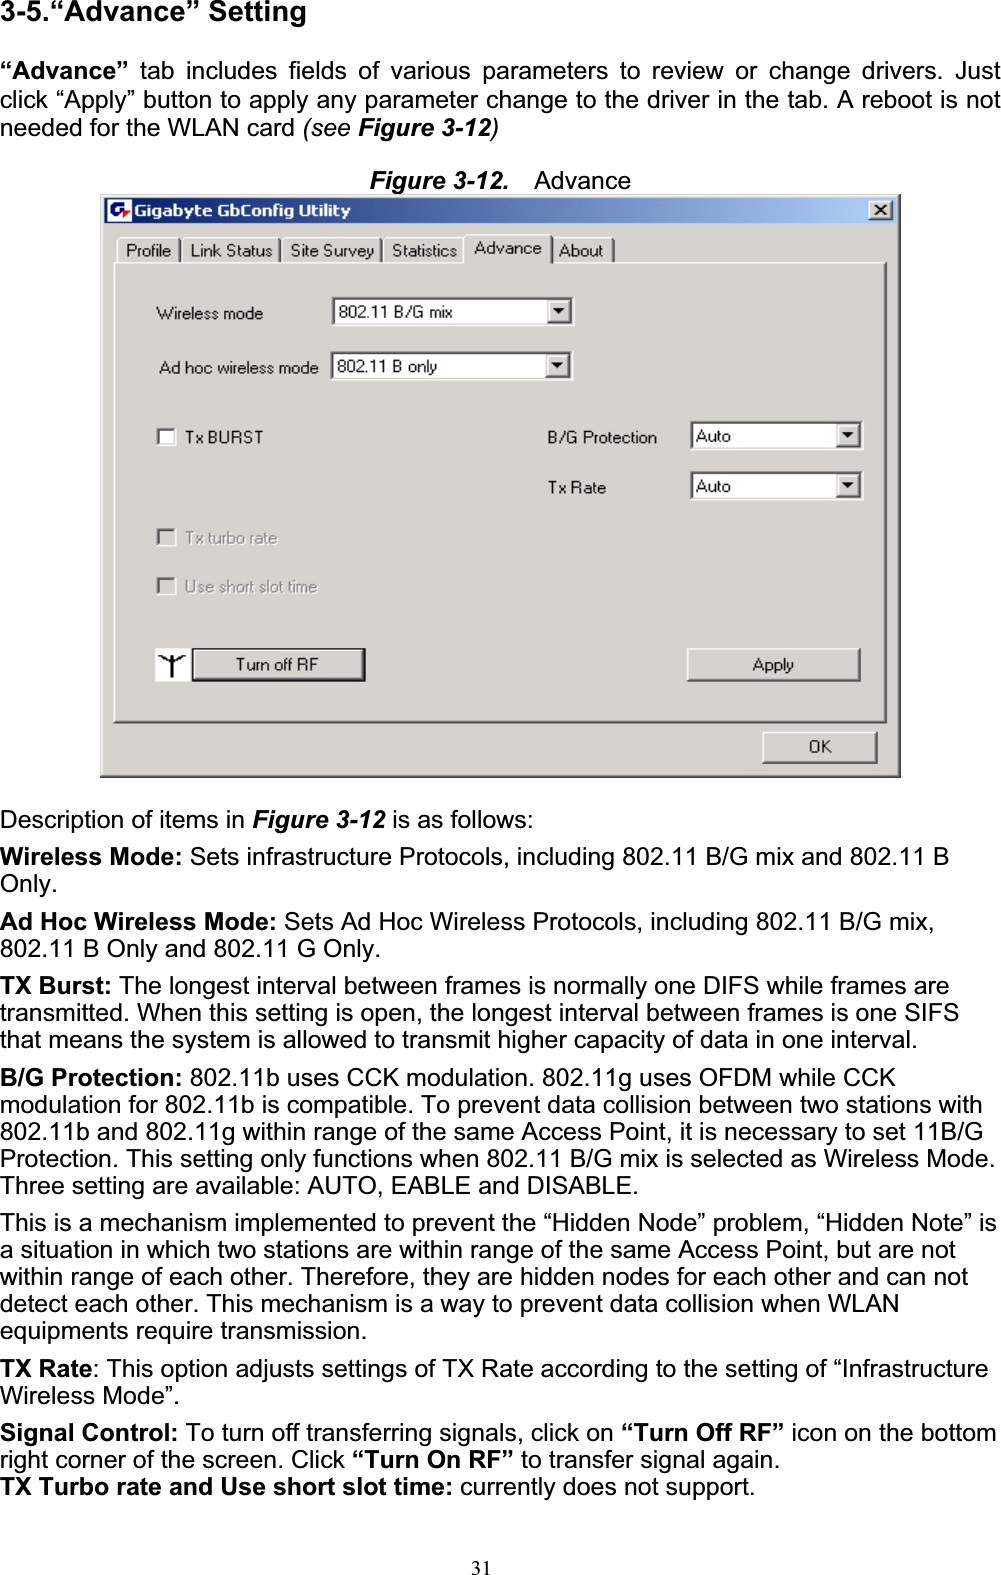 313-5.“Advance” Setting “Advance” tab includes fields of various parameters to review or change drivers. Just click “Apply” button to apply any parameter change to the driver in the tab. A reboot is not needed for the WLAN card (see Figure 3-12)Figure 3-12.   AdvanceDescription of items in Figure 3-12 is as follows: Wireless Mode: Sets infrastructure Protocols, including 802.11 B/G mix and 802.11 B Only.Ad Hoc Wireless Mode: Sets Ad Hoc Wireless Protocols, including 802.11 B/G mix, 802.11 B Only and 802.11 G Only.TX Burst: The longest interval between frames is normally one DIFS while frames are transmitted. When this setting is open, the longest interval between frames is one SIFS that means the system is allowed to transmit higher capacity of data in one interval. B/G Protection: 802.11b uses CCK modulation. 802.11g uses OFDM while CCK modulation for 802.11b is compatible. To prevent data collision between two stations with 802.11b and 802.11g within range of the same Access Point, it is necessary to set 11B/G Protection. This setting only functions when 802.11 B/G mix is selected as Wireless Mode. Three setting are available: AUTO, EABLE and DISABLE. This is a mechanism implemented to prevent the “Hidden Node” problem, “Hidden Note” is a situation in which two stations are within range of the same Access Point, but are not within range of each other. Therefore, they are hidden nodes for each other and can not detect each other. This mechanism is a way to prevent data collision when WLAN equipments require transmission. TX Rate: This option adjusts settings of TX Rate according to the setting of “Infrastructure Wireless Mode”. Signal Control: To turn off transferring signals, click on “Turn Off RF” icon on the bottom right corner of the screen. Click “Turn On RF” to transfer signal again. TX Turbo rate and Use short slot time: currently does not support. 